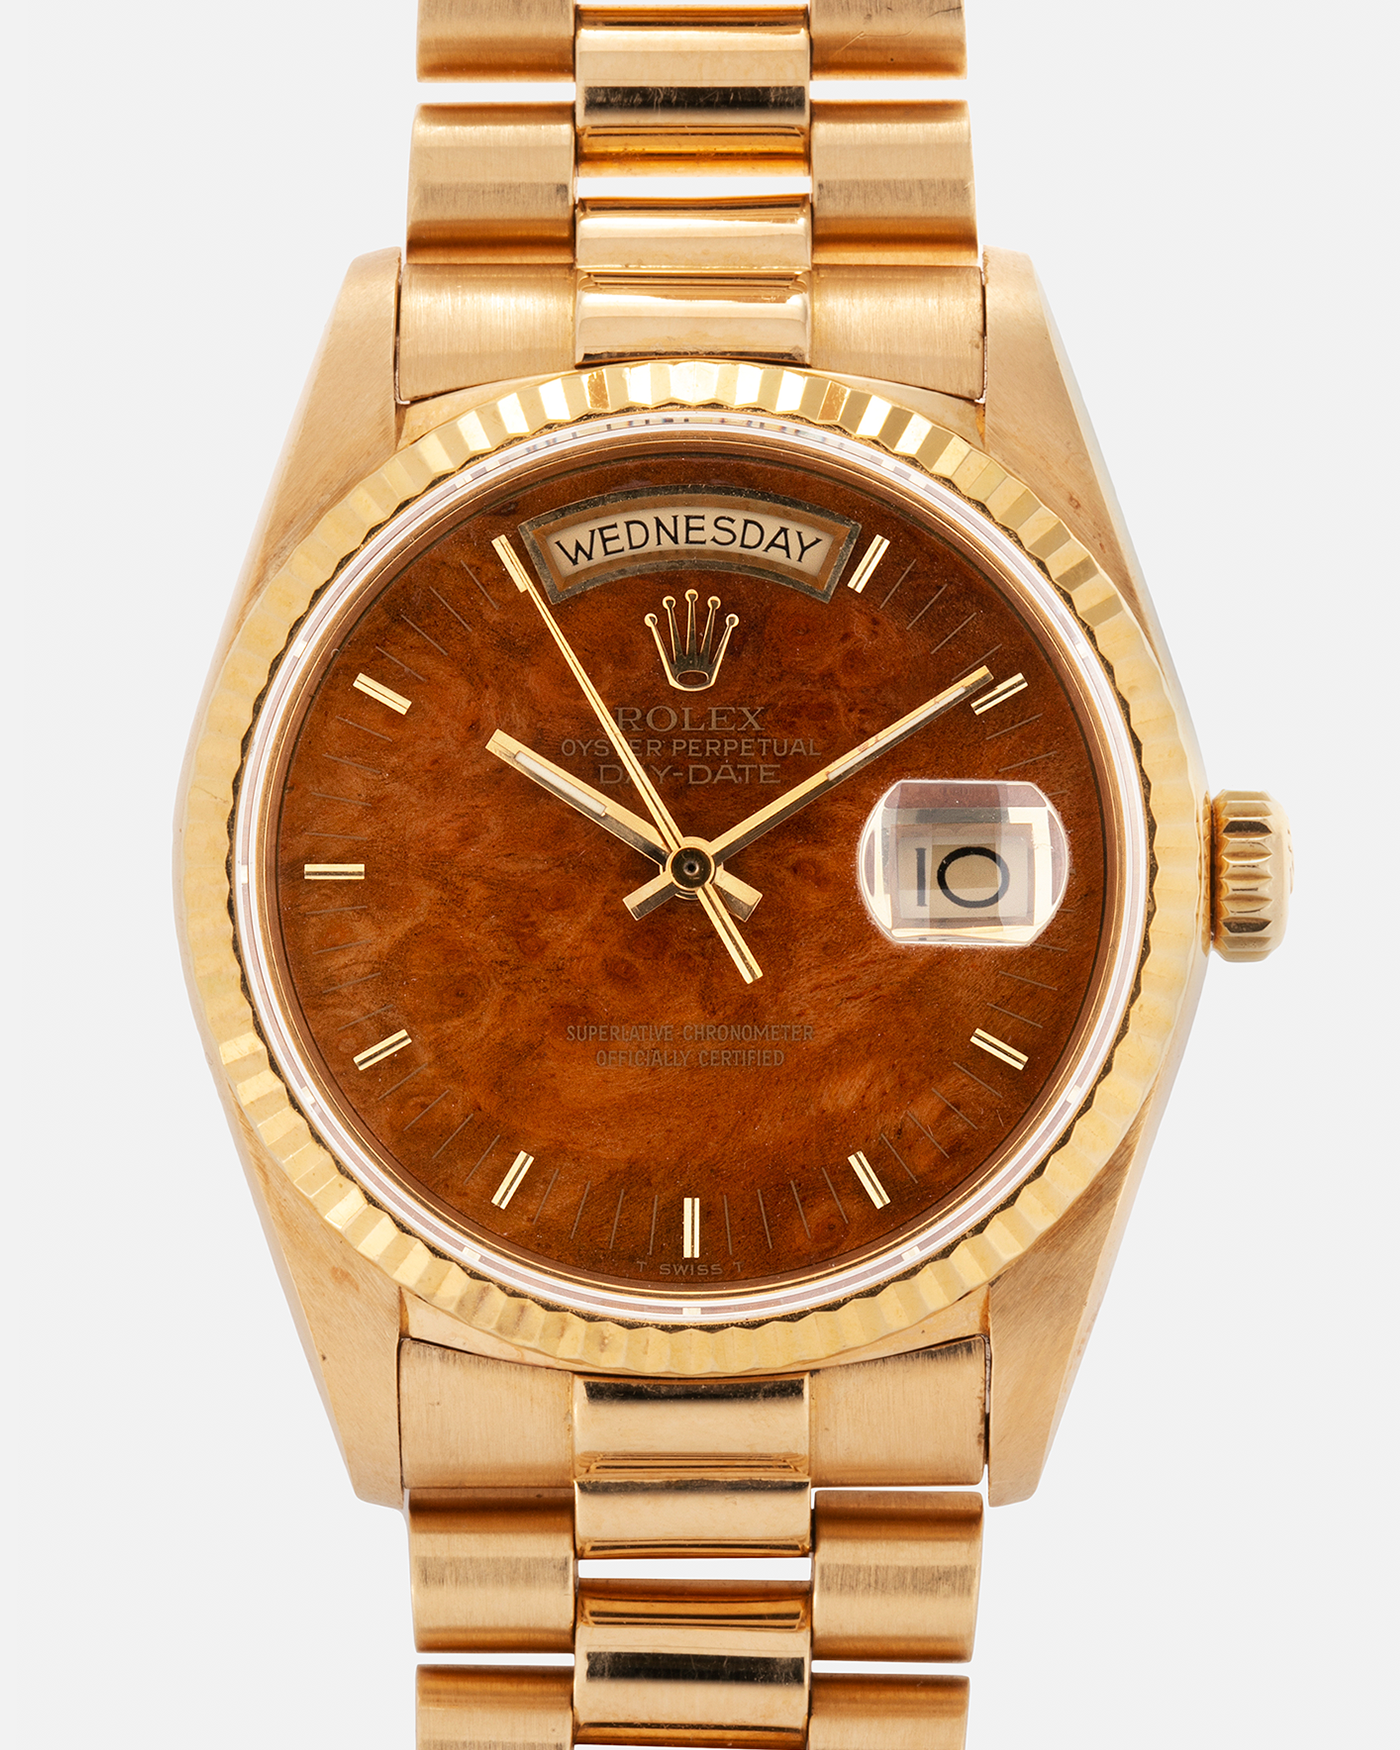 Brand: Rolex Year: 1988 Model: Day Date Reference Number: 18038 Serial Number: R586XXX Material: 18-carat Yellow Gold, ‘Burl Wood’ Dial Movement: Rolex Cal. 3055, Self-Winding Case Diameter: 36mm Lug Width: 20mm Bracelet: Rolex 18-carat Yellow Gold 8385 Presidential Bracelet with 55 Curved End Links